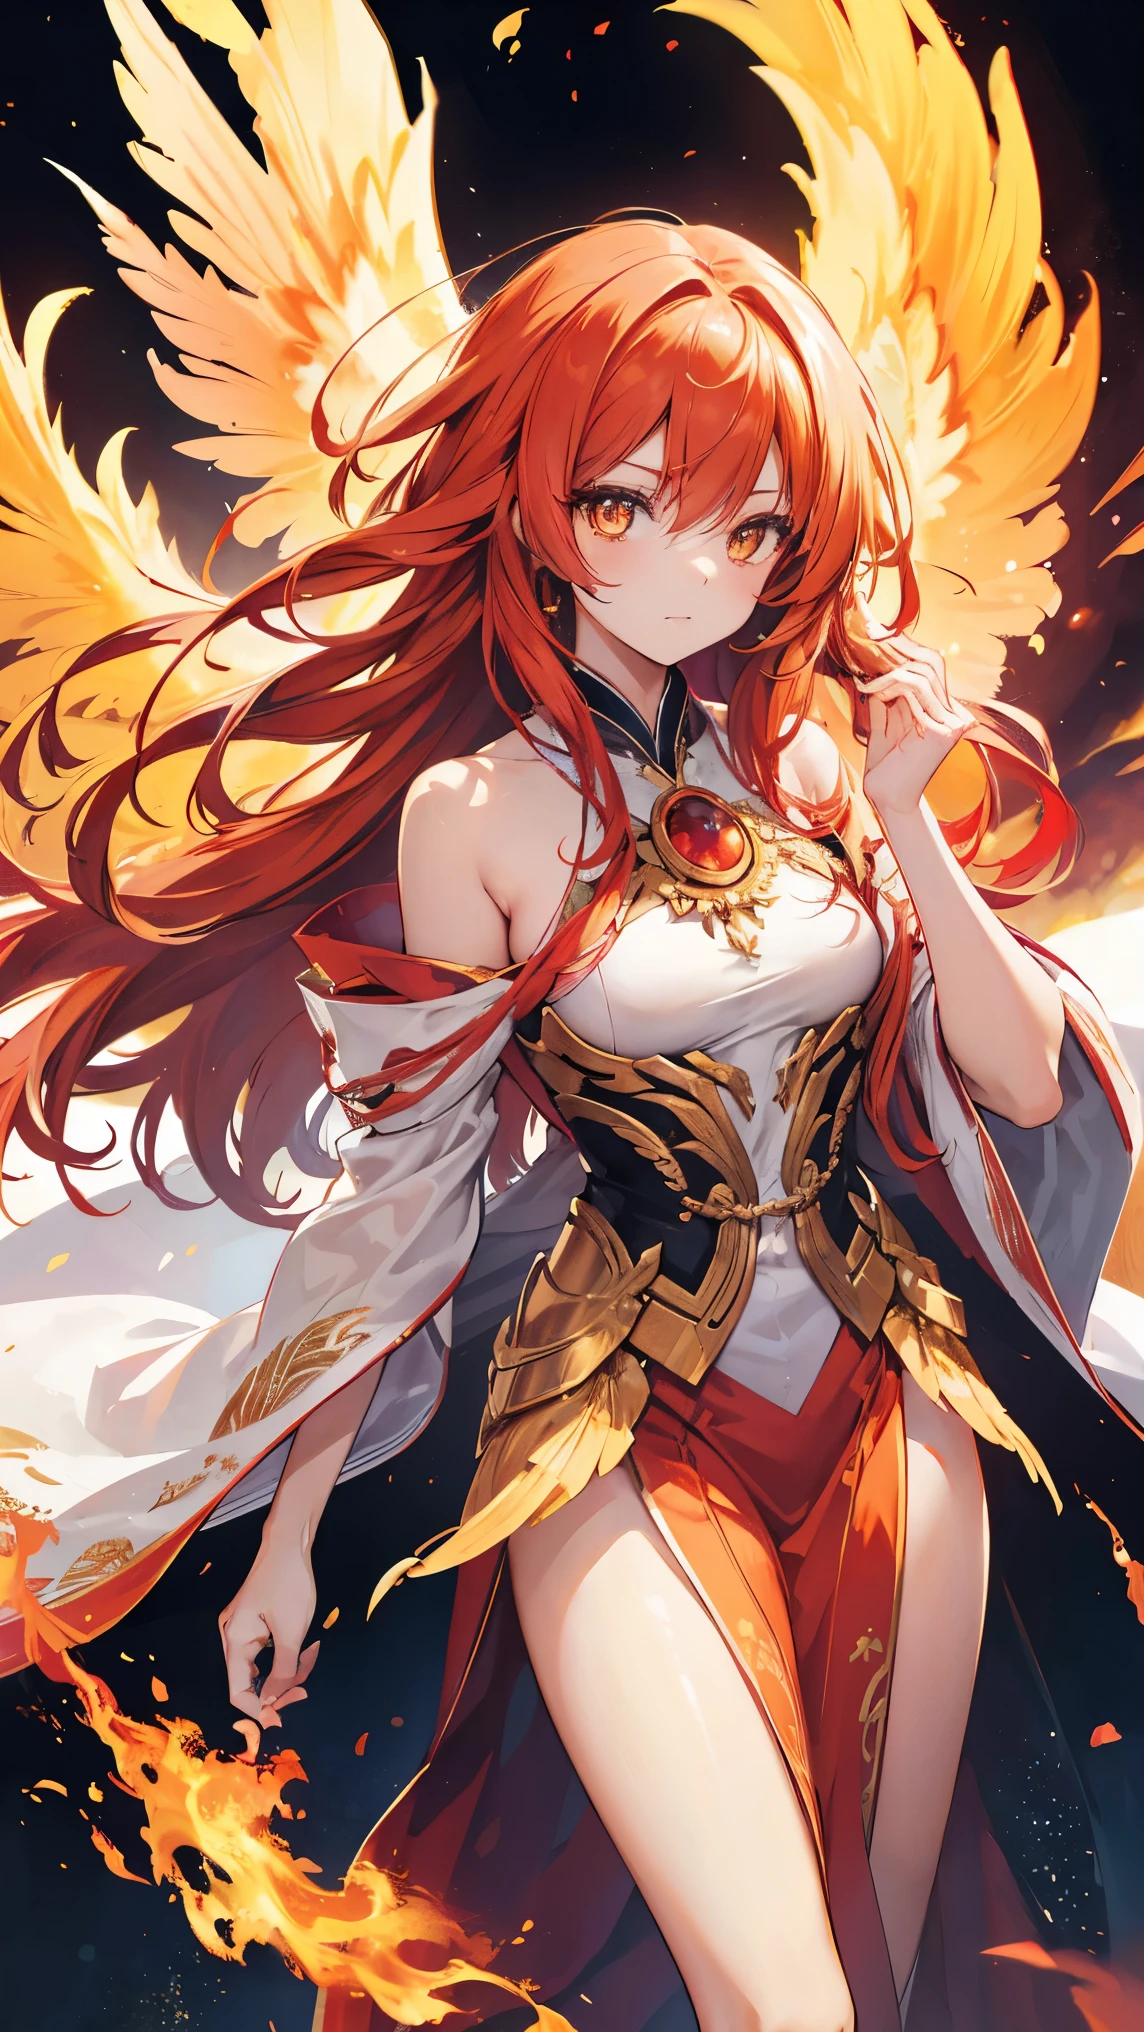 8k, best quality, (lifelike:1.4), original photo, 1 girl, Phoenix hair, fiery feathers, draped in ethereal robes, posture: rising from ashes with reborn grace, luminous golden eyes